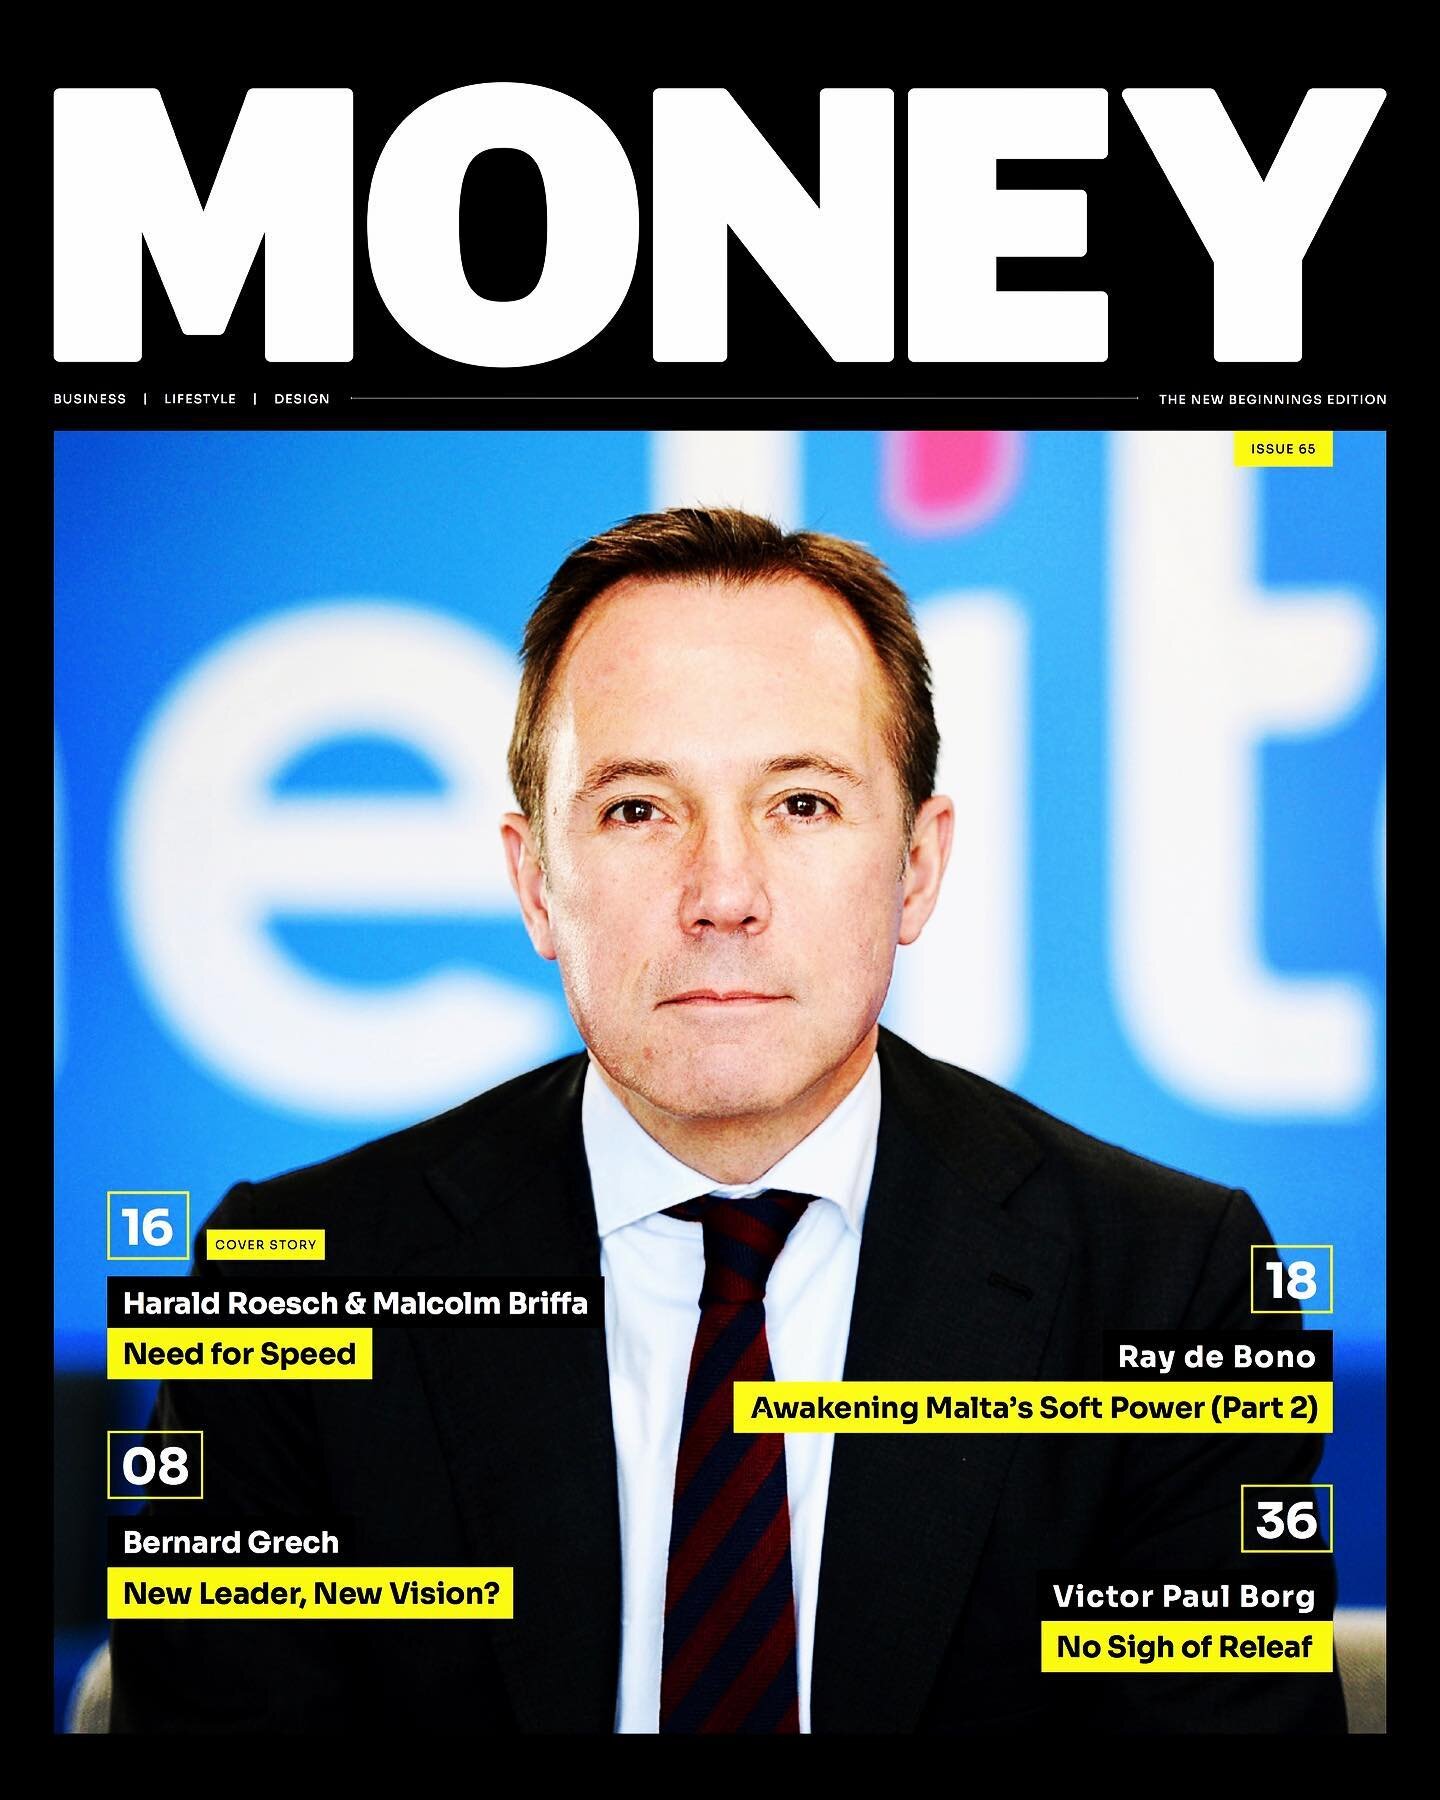 .
The New Beginnings edition is up and loaded. Be the first to read the online version! 🤓 💪 🌟
.
🖥📱 http://bit.ly/Money65
.
#moneymag #melita #5G #bernardgrech #martheseportelli #softpower #startups #sustainability #politics #microfarming #design